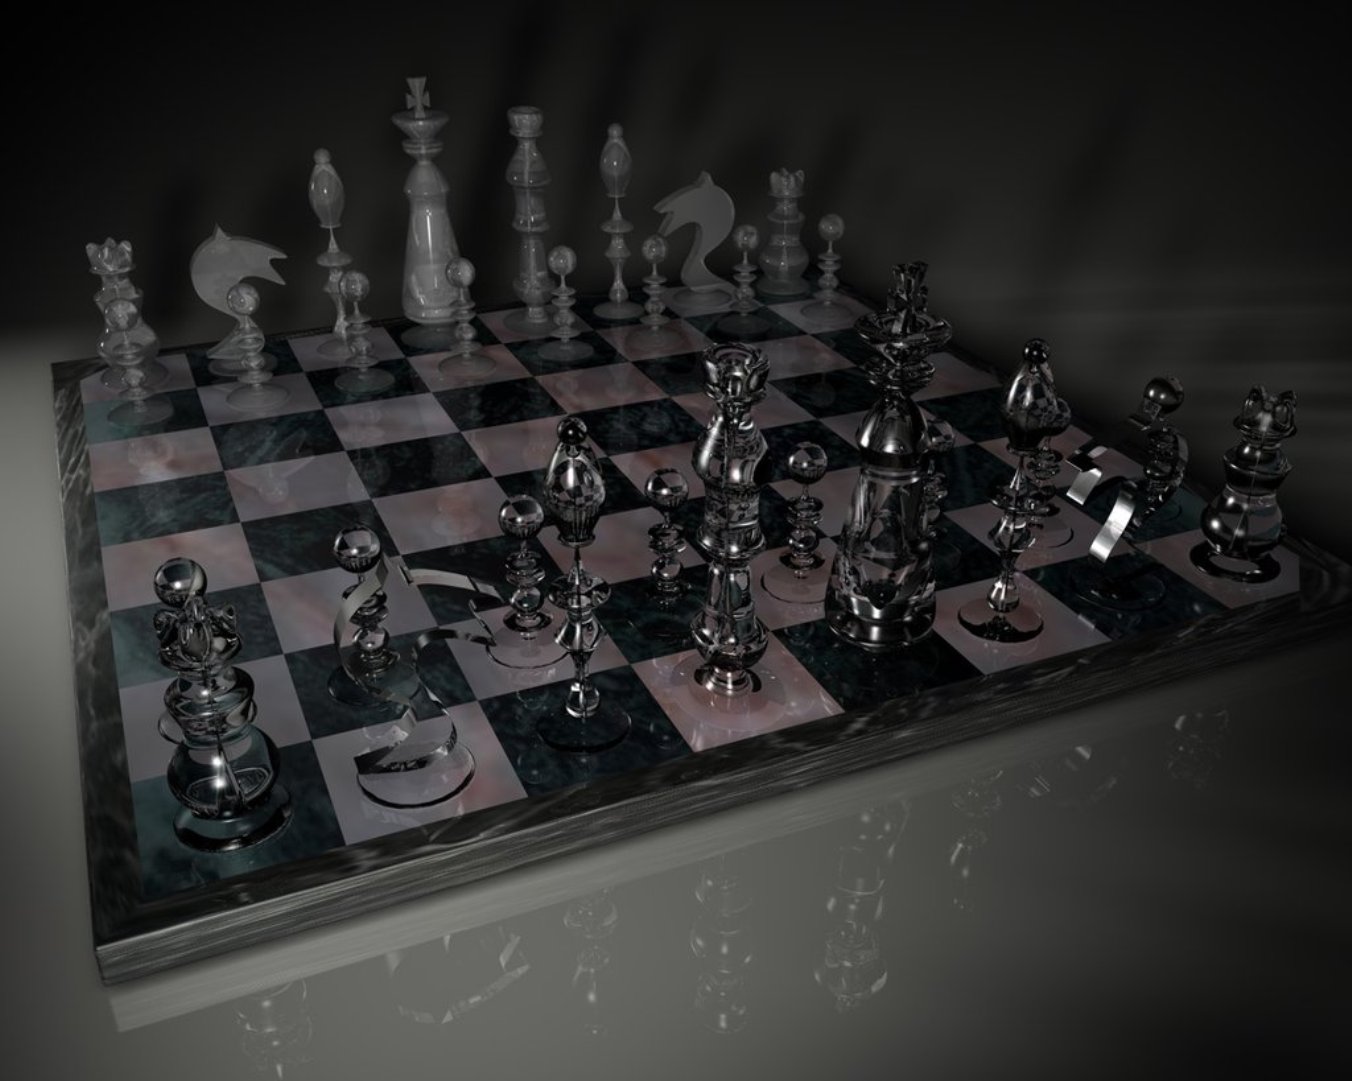 The Chess Desktop And Mobile Wallpaper Wallippo